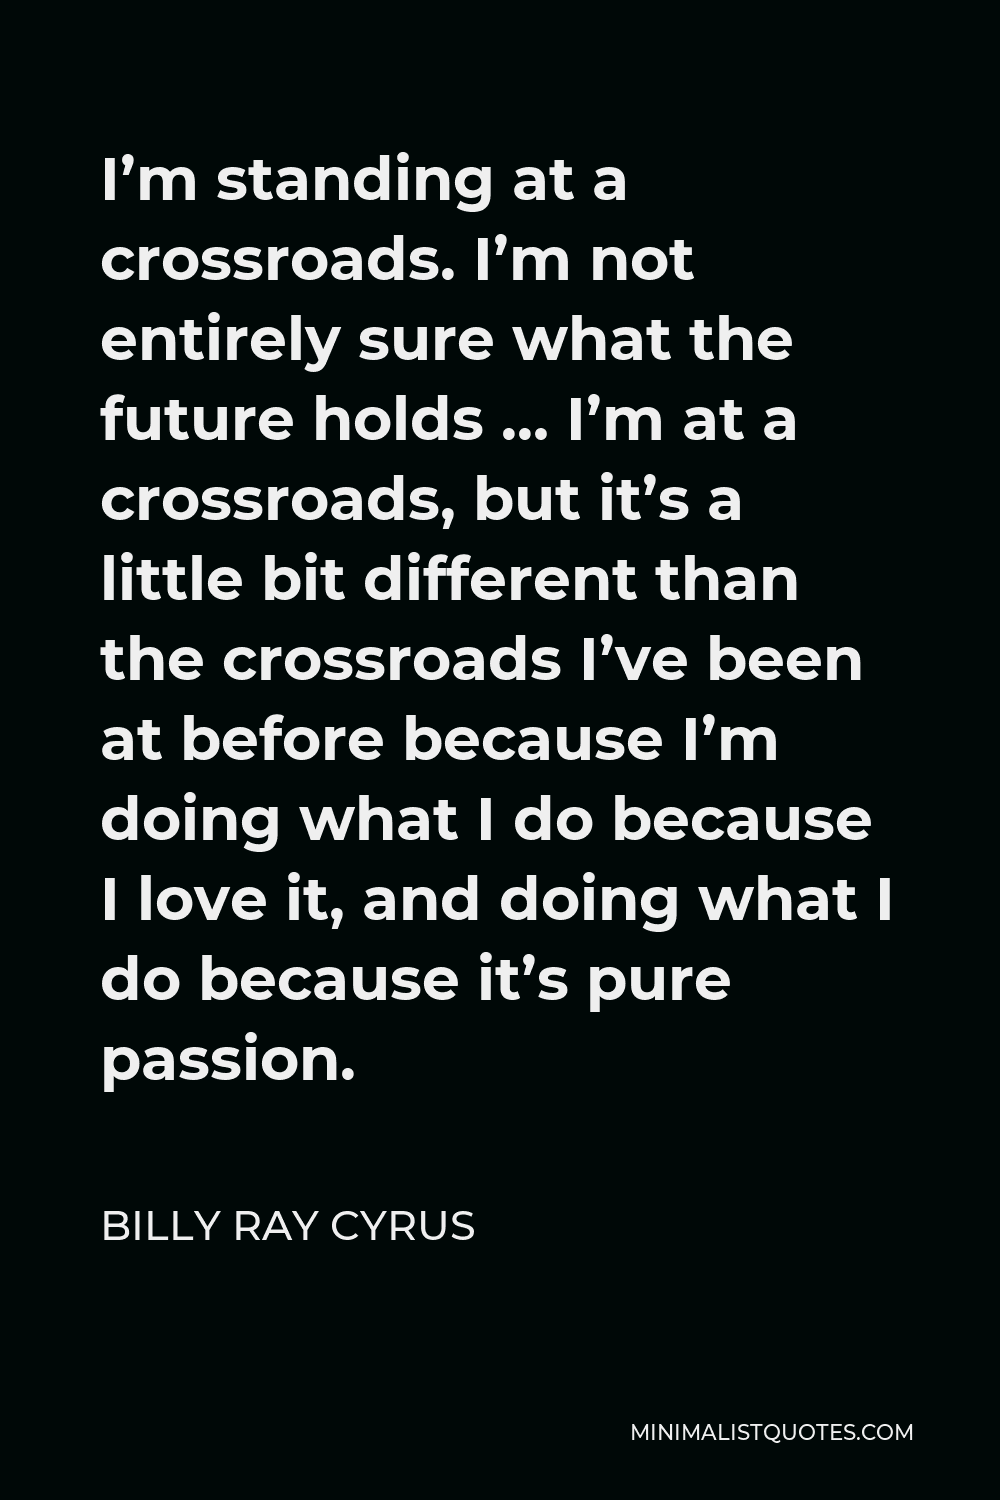 Billy Ray Cyrus Quote - I’m standing at a crossroads. I’m not entirely sure what the future holds … I’m at a crossroads, but it’s a little bit different than the crossroads I’ve been at before because I’m doing what I do because I love it, and doing what I do because it’s pure passion.